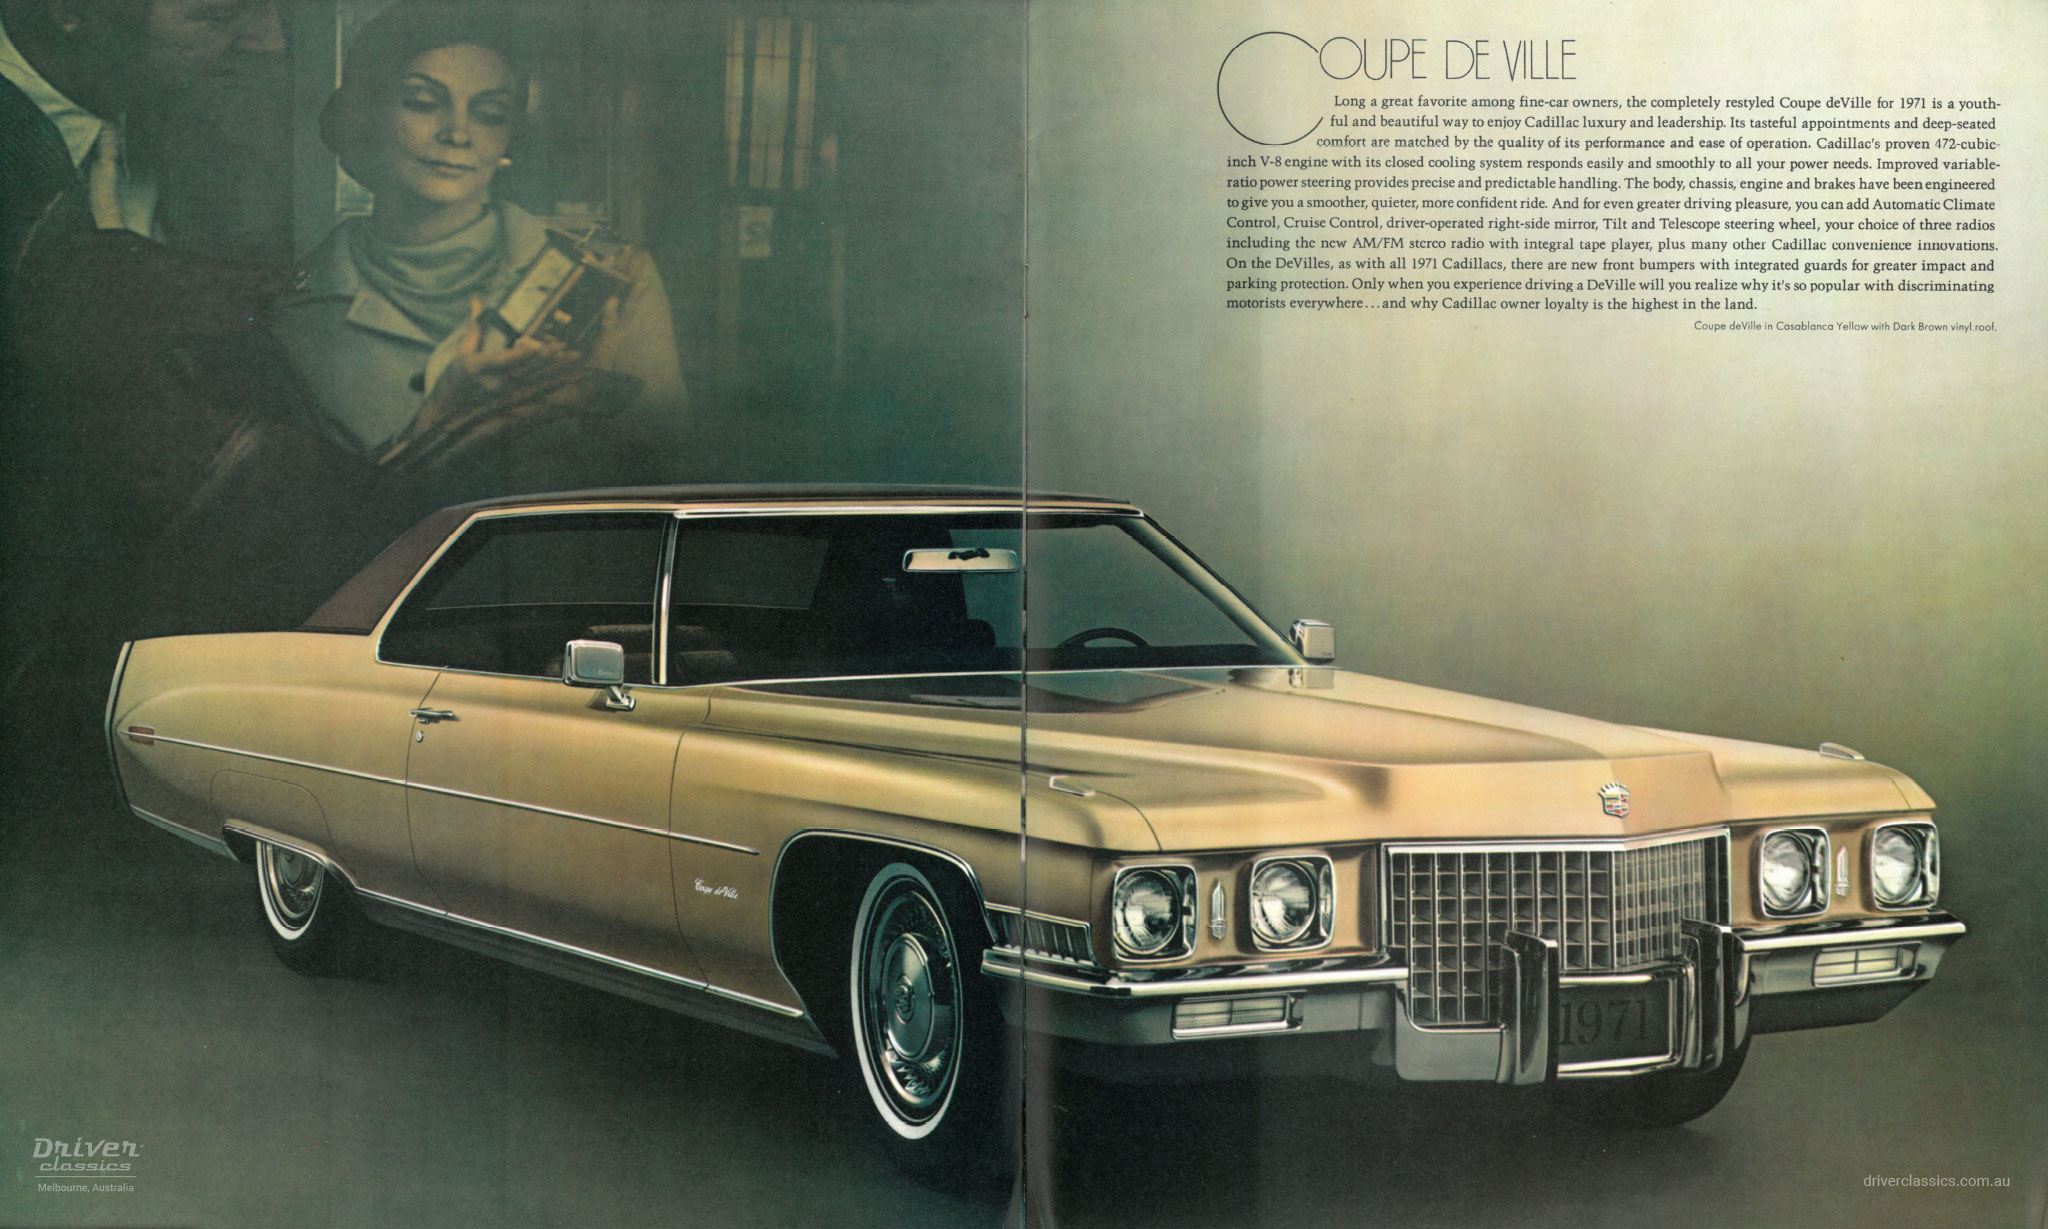 Brochure page from 1971 Cadillac Coupe de Ville brochure